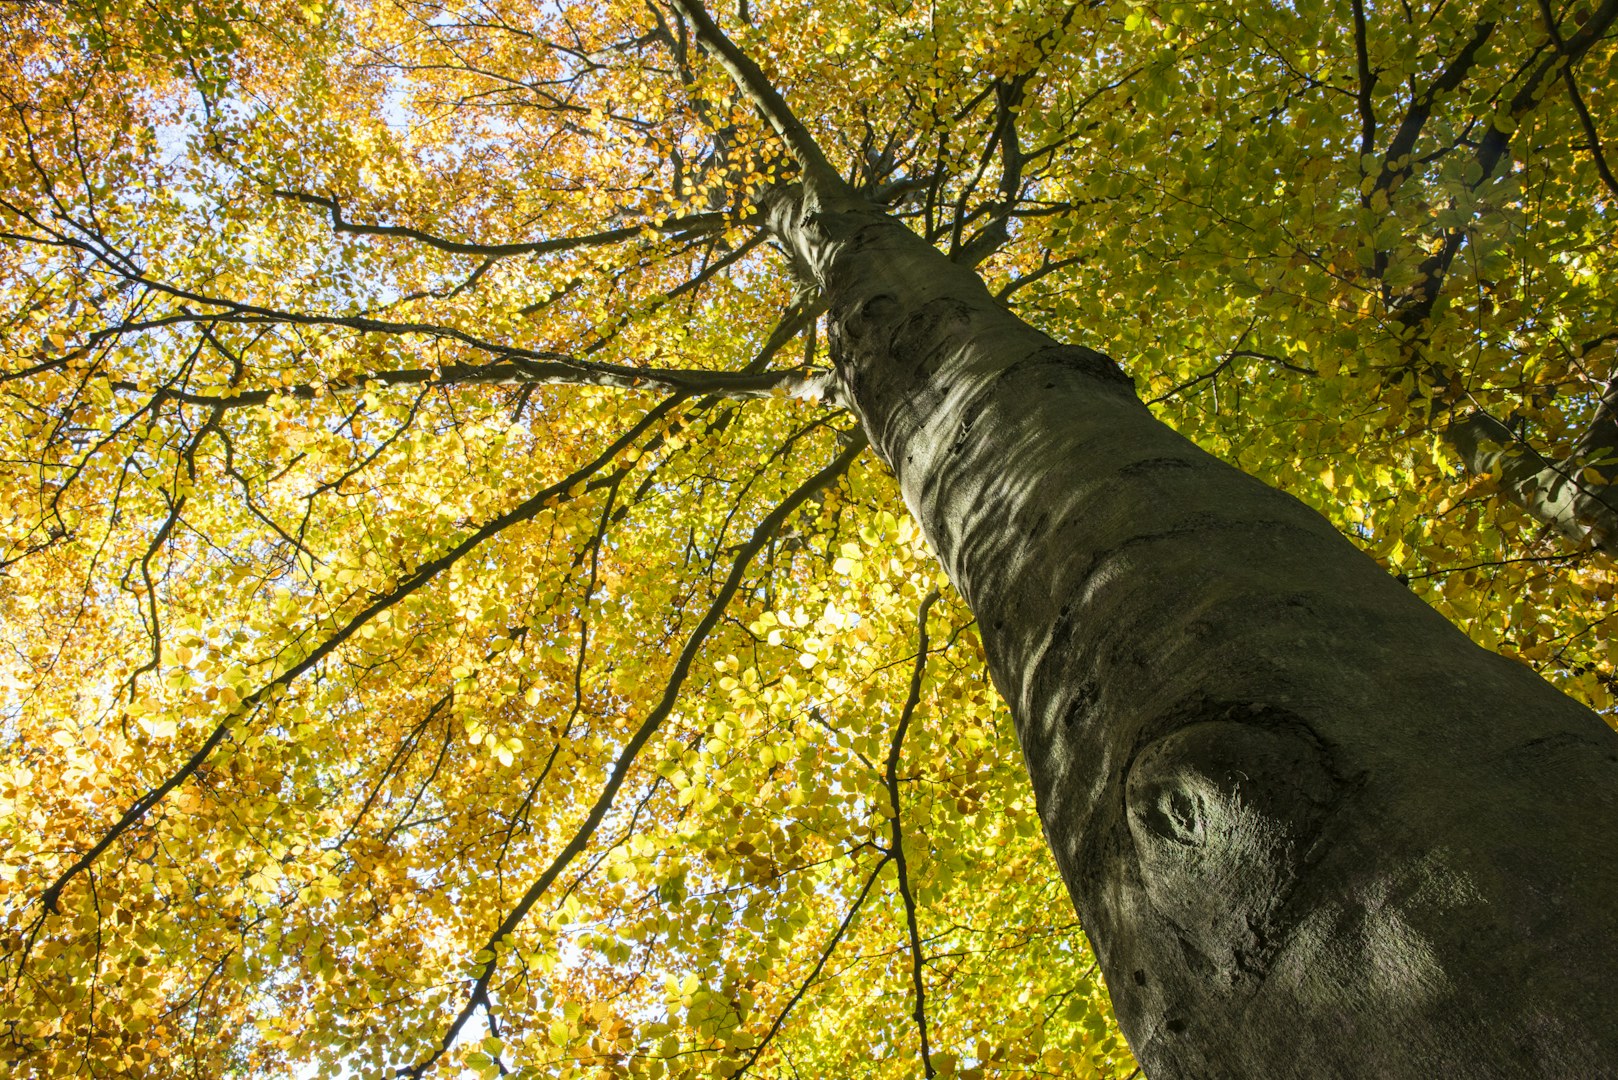 18 Health Benefits of Trees and Forests - One Tree Planted